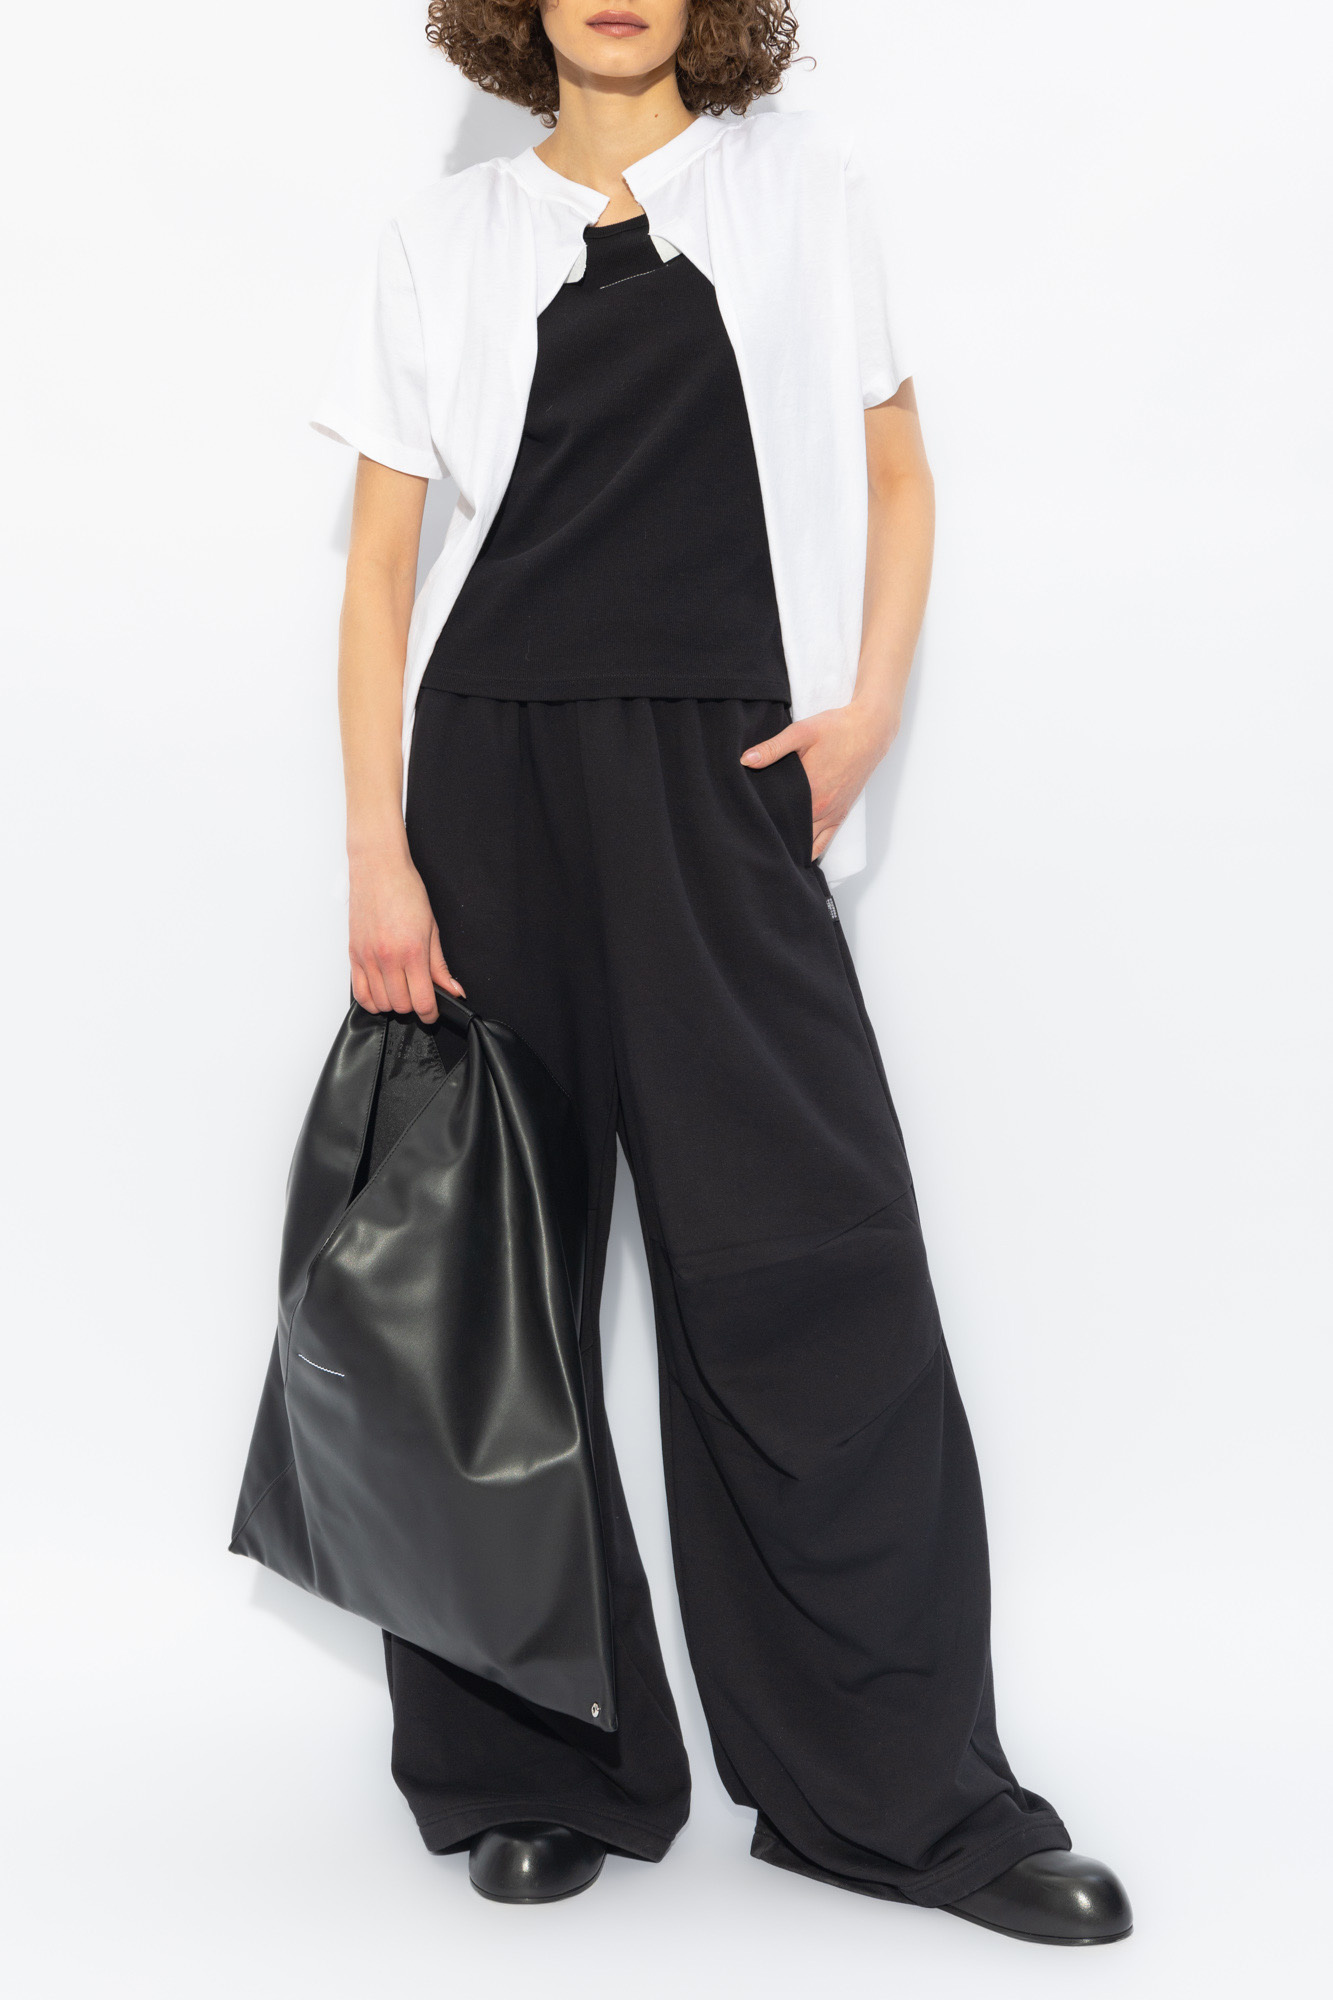 Company Black Ergonomic-Fit Cargo Pants Isabel Marant belted dress in white cotton